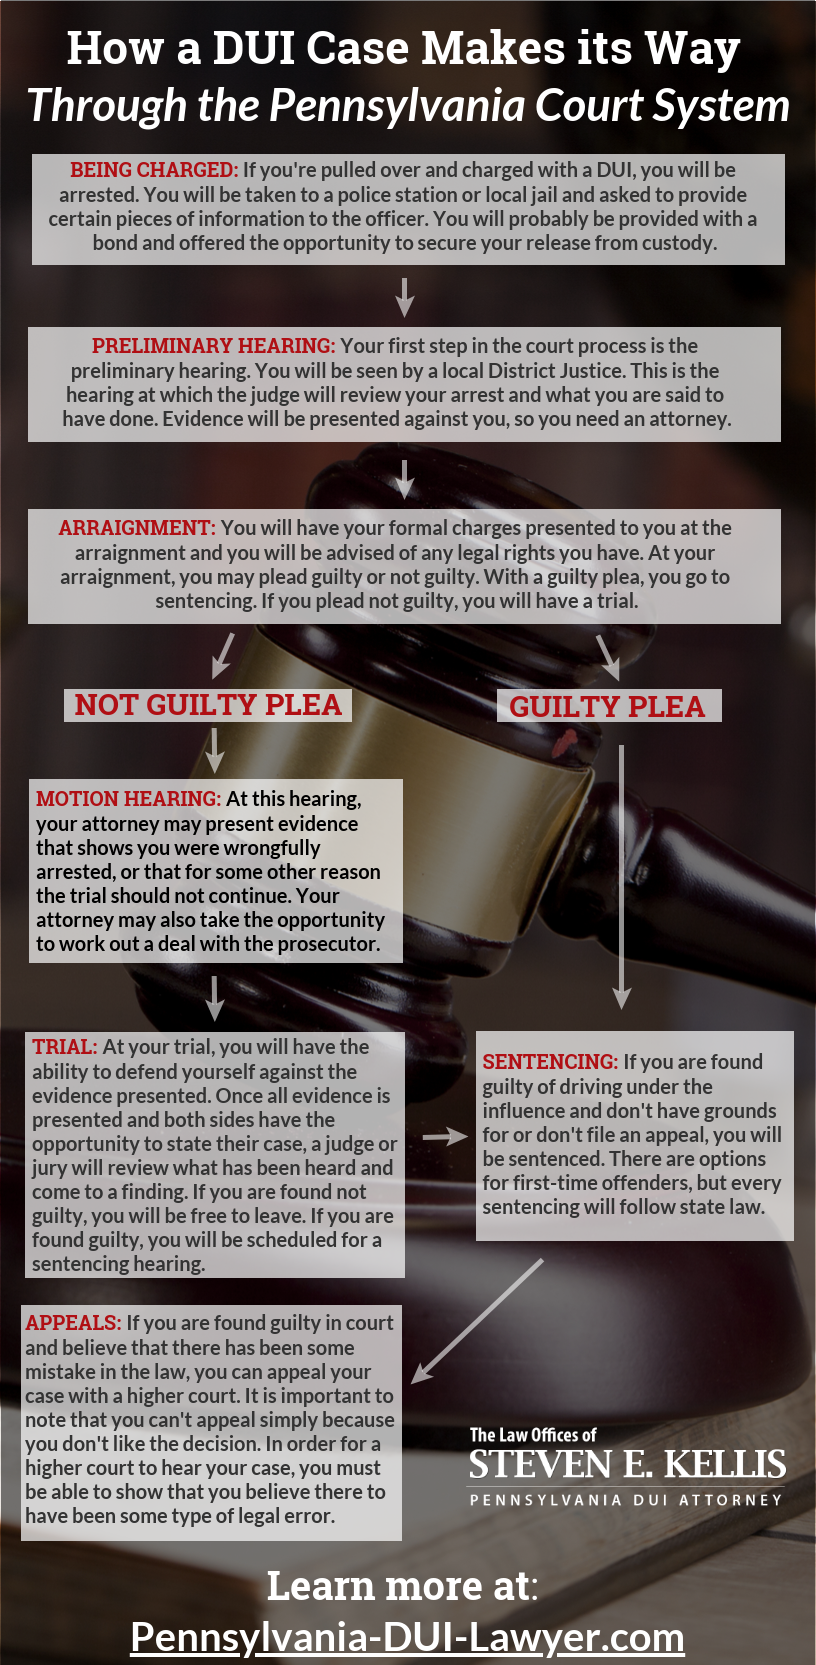 How a DUI Case Makes its Way Through the Pennsylvania Court System infographic